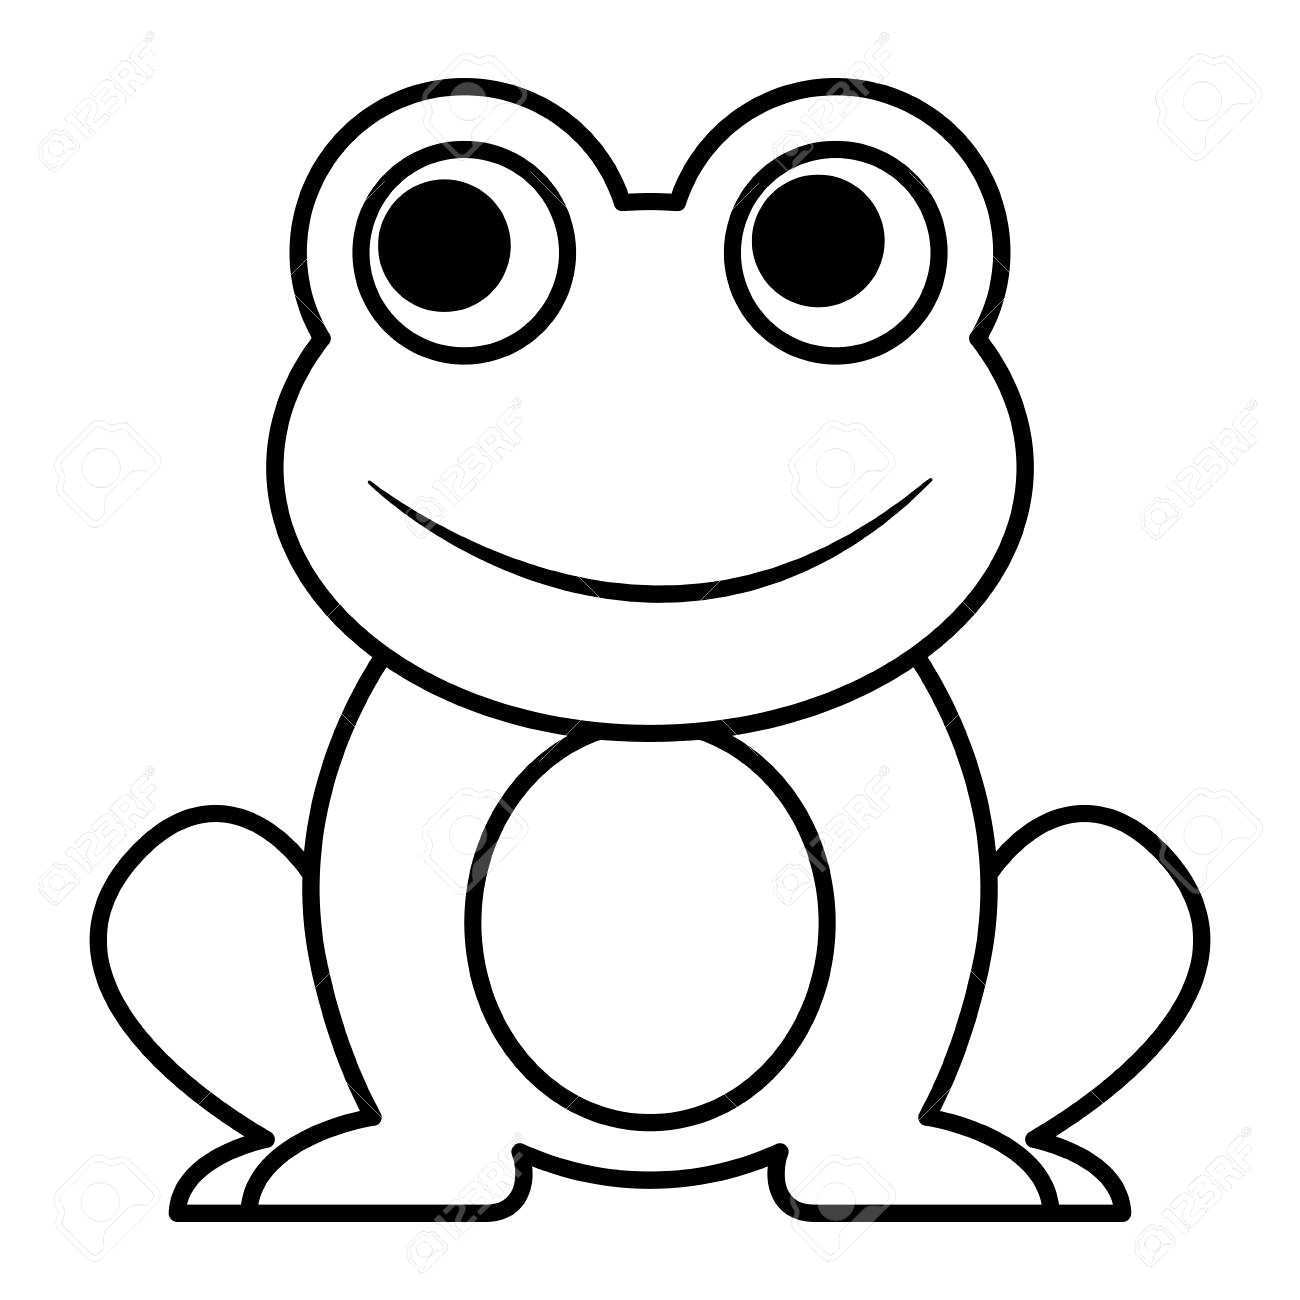 Frog Drawing - Office Manager Cover Letter